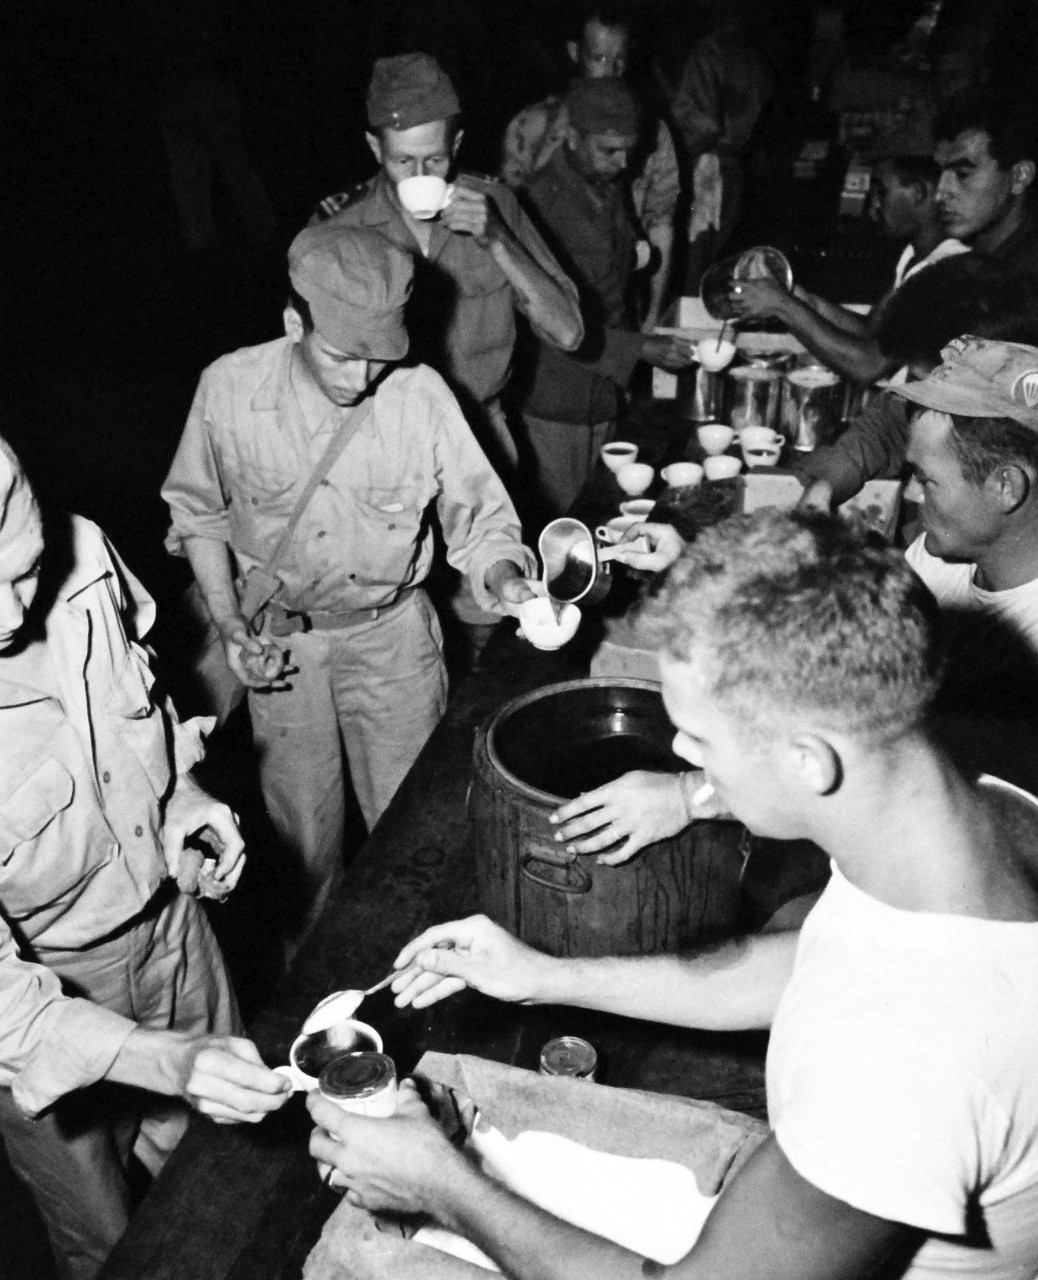 80-G-495643:  Prisoner of War Camp, Japan, 1945.    Former Prisoners of War preparing to leave Yokosuka, Japan, for the United States.  Coffee and doughnuts are served.  Some of these are Allied prisoners.  Photograph released September 19, 1945.  Official U.S. Navy photograph, now in the collections of the National Archives.  (2014/05/29).    The original is a small photograph.   